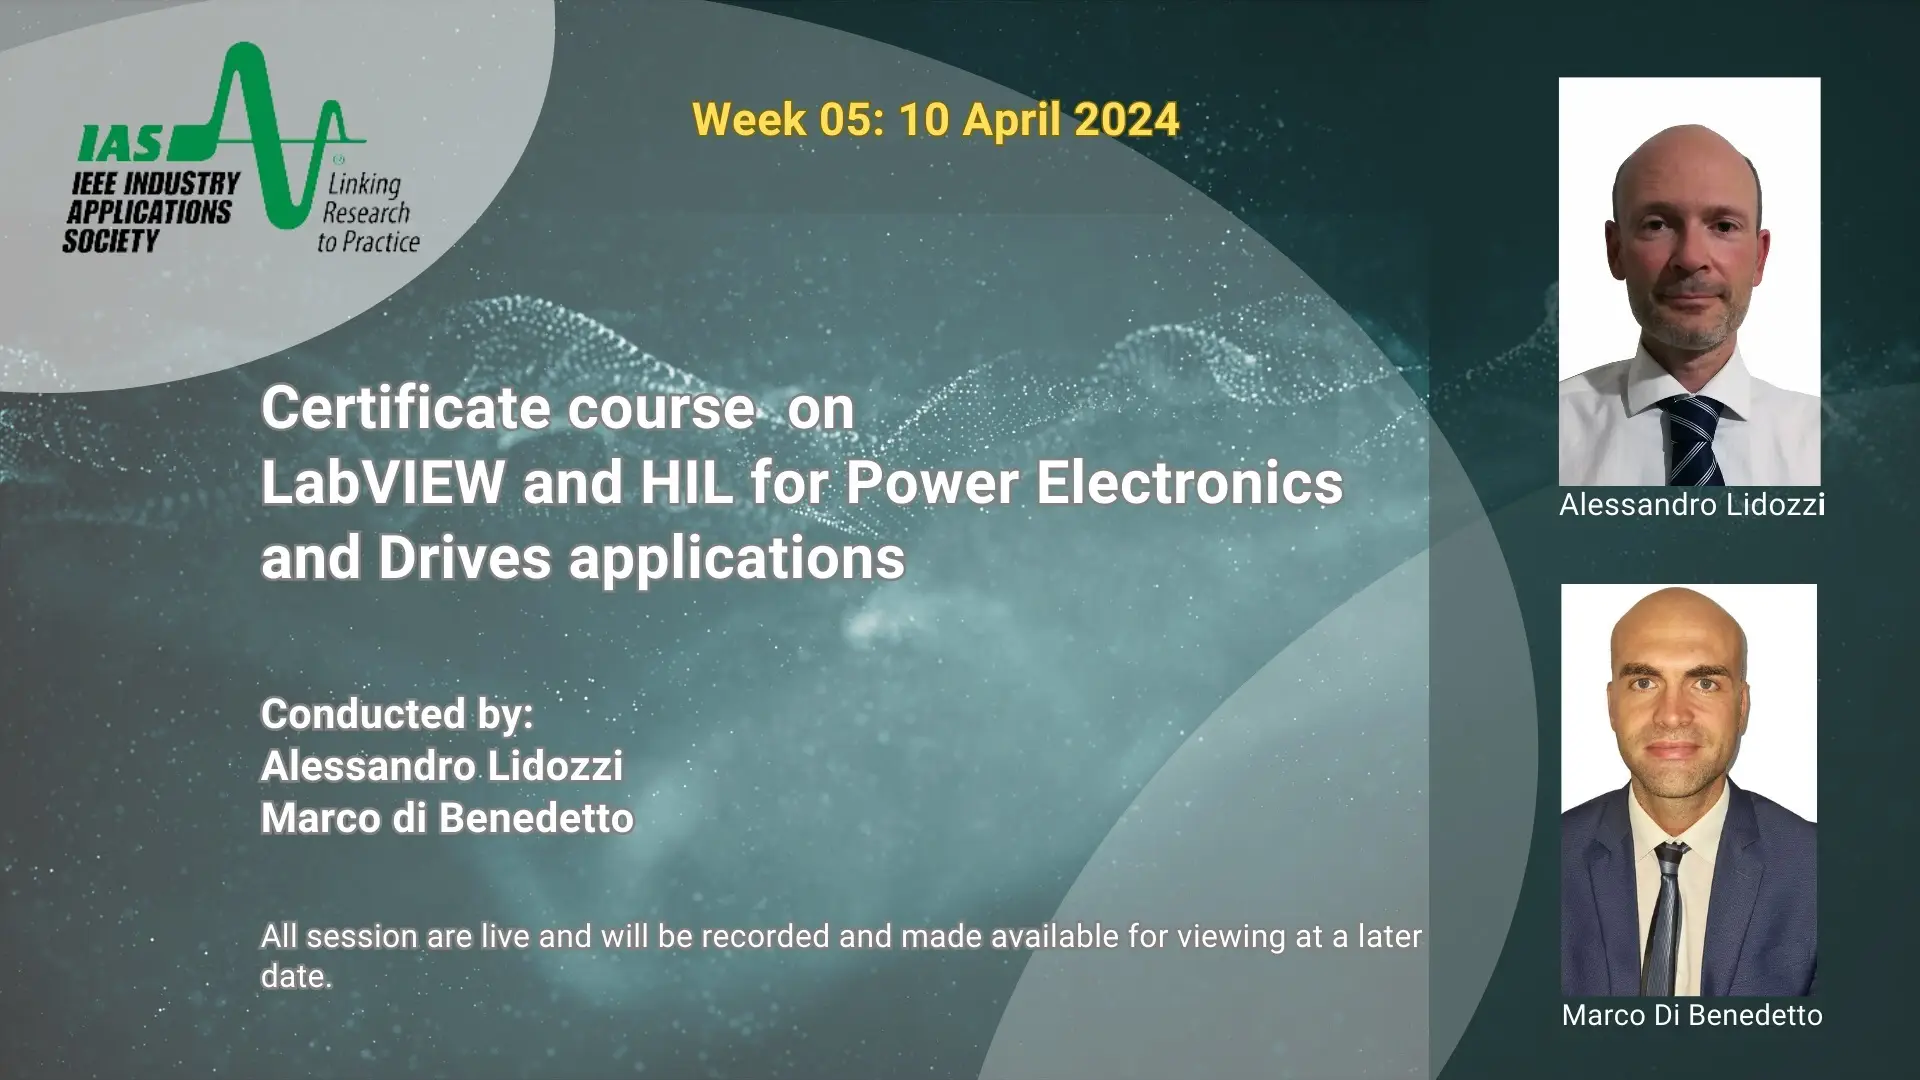 Week 05: Certificate Course on LabVIEW and HIL for Power Electronics and Drives Applications